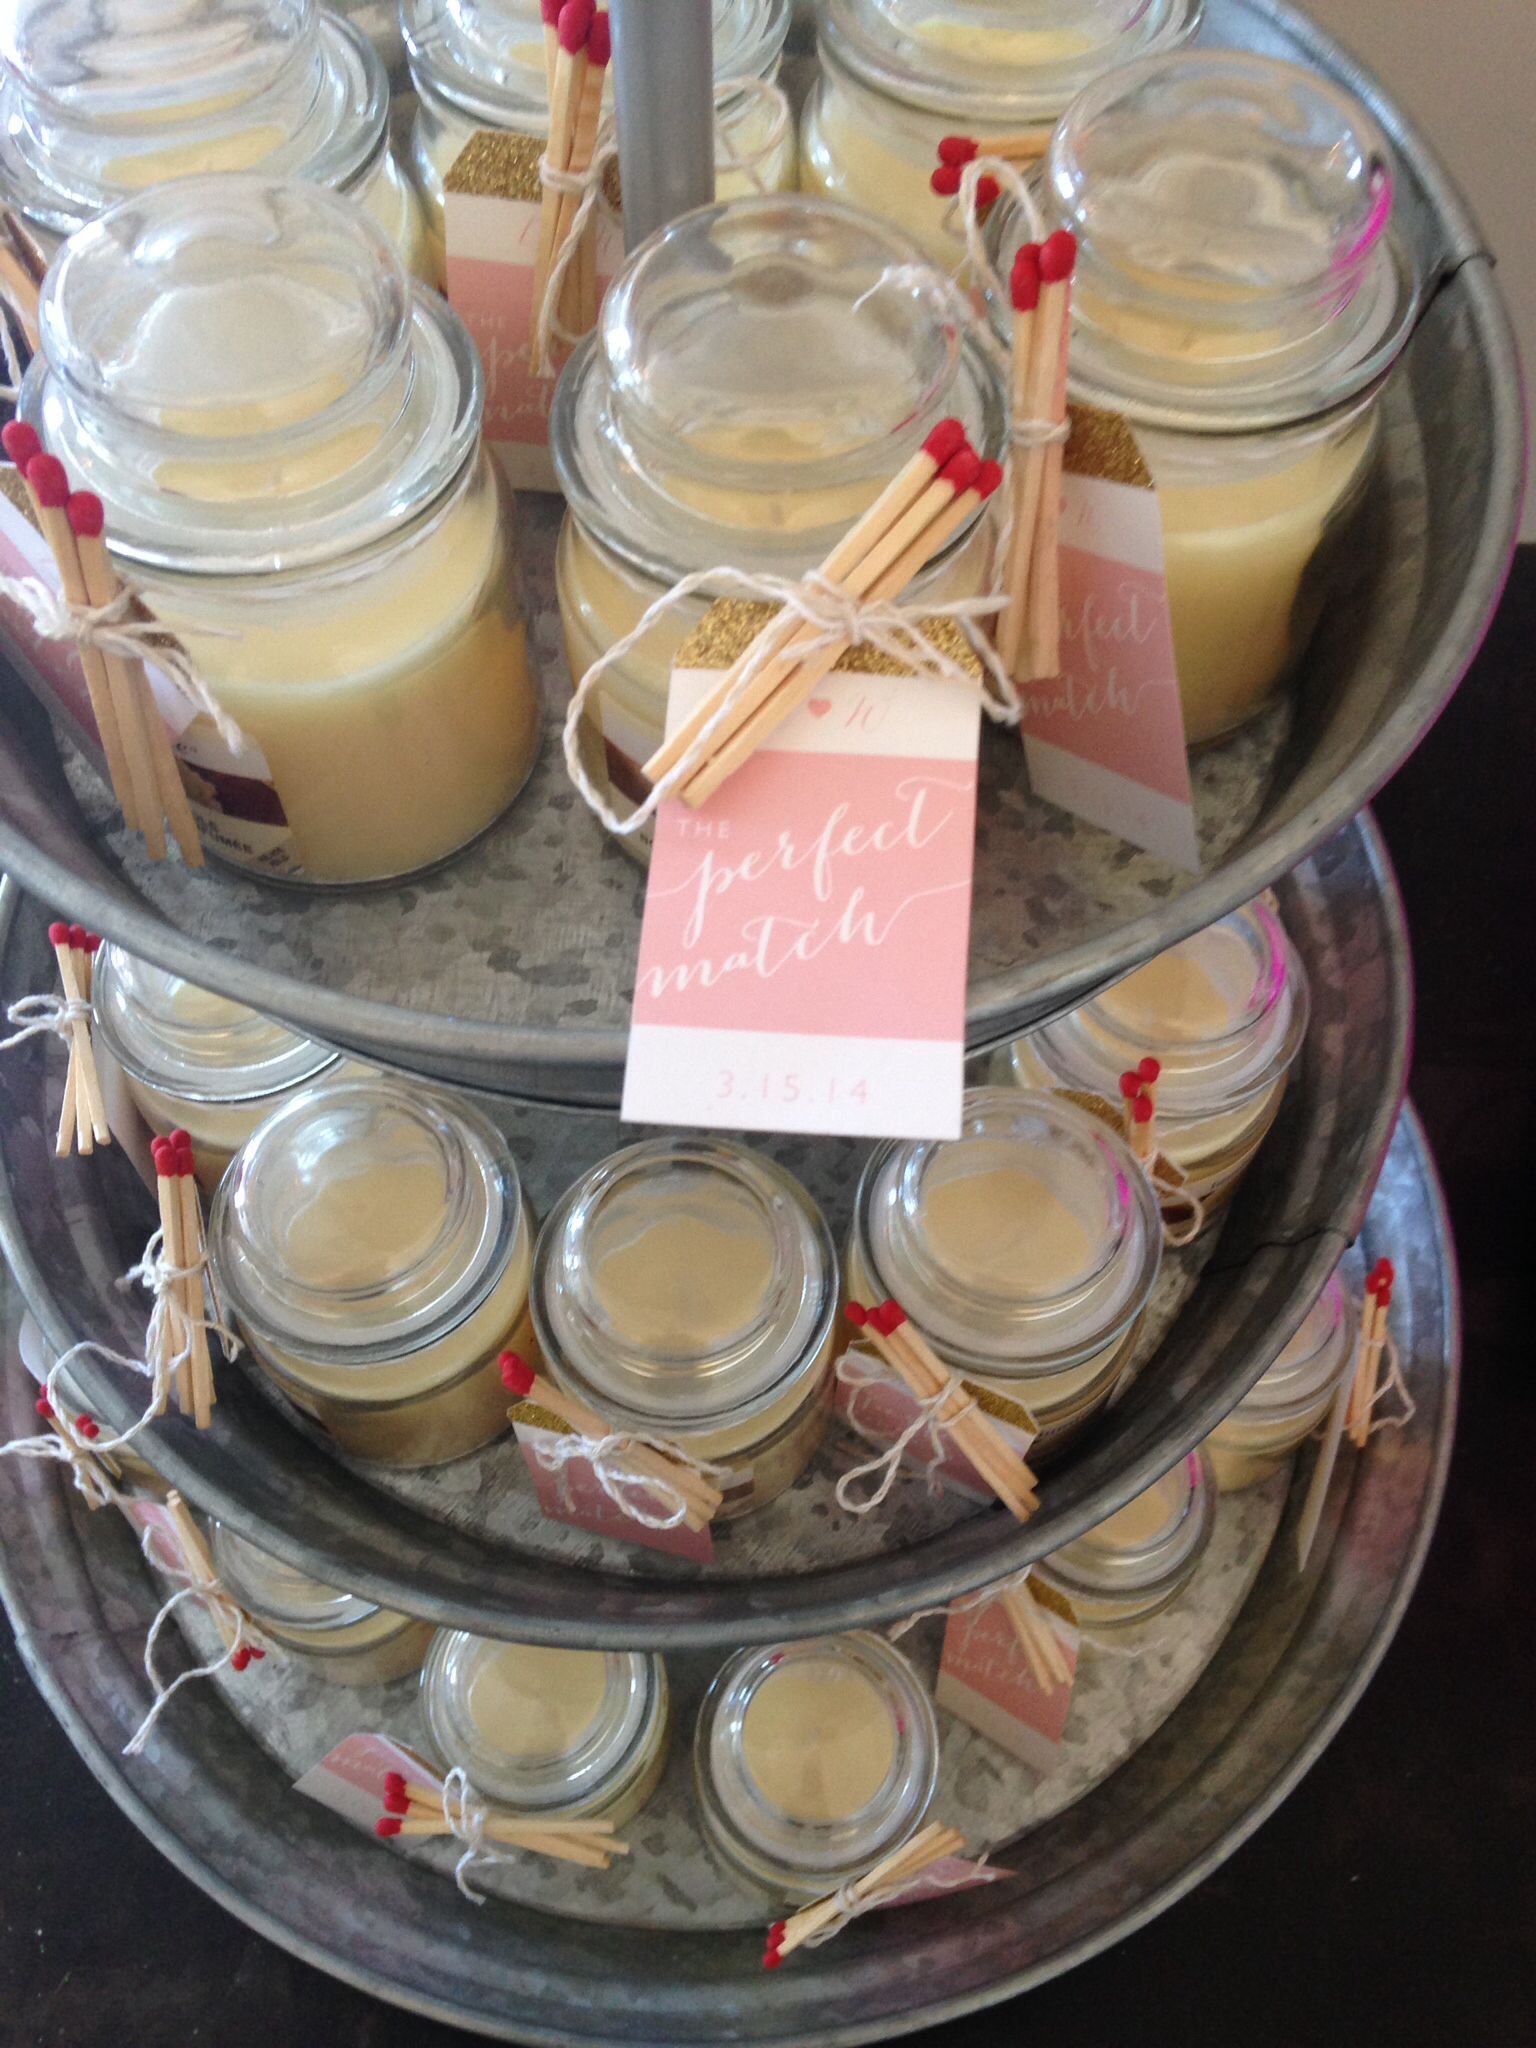 Party Favors For Baby Shower Guests
 Wedding shower favors "the perfect match" in 2019